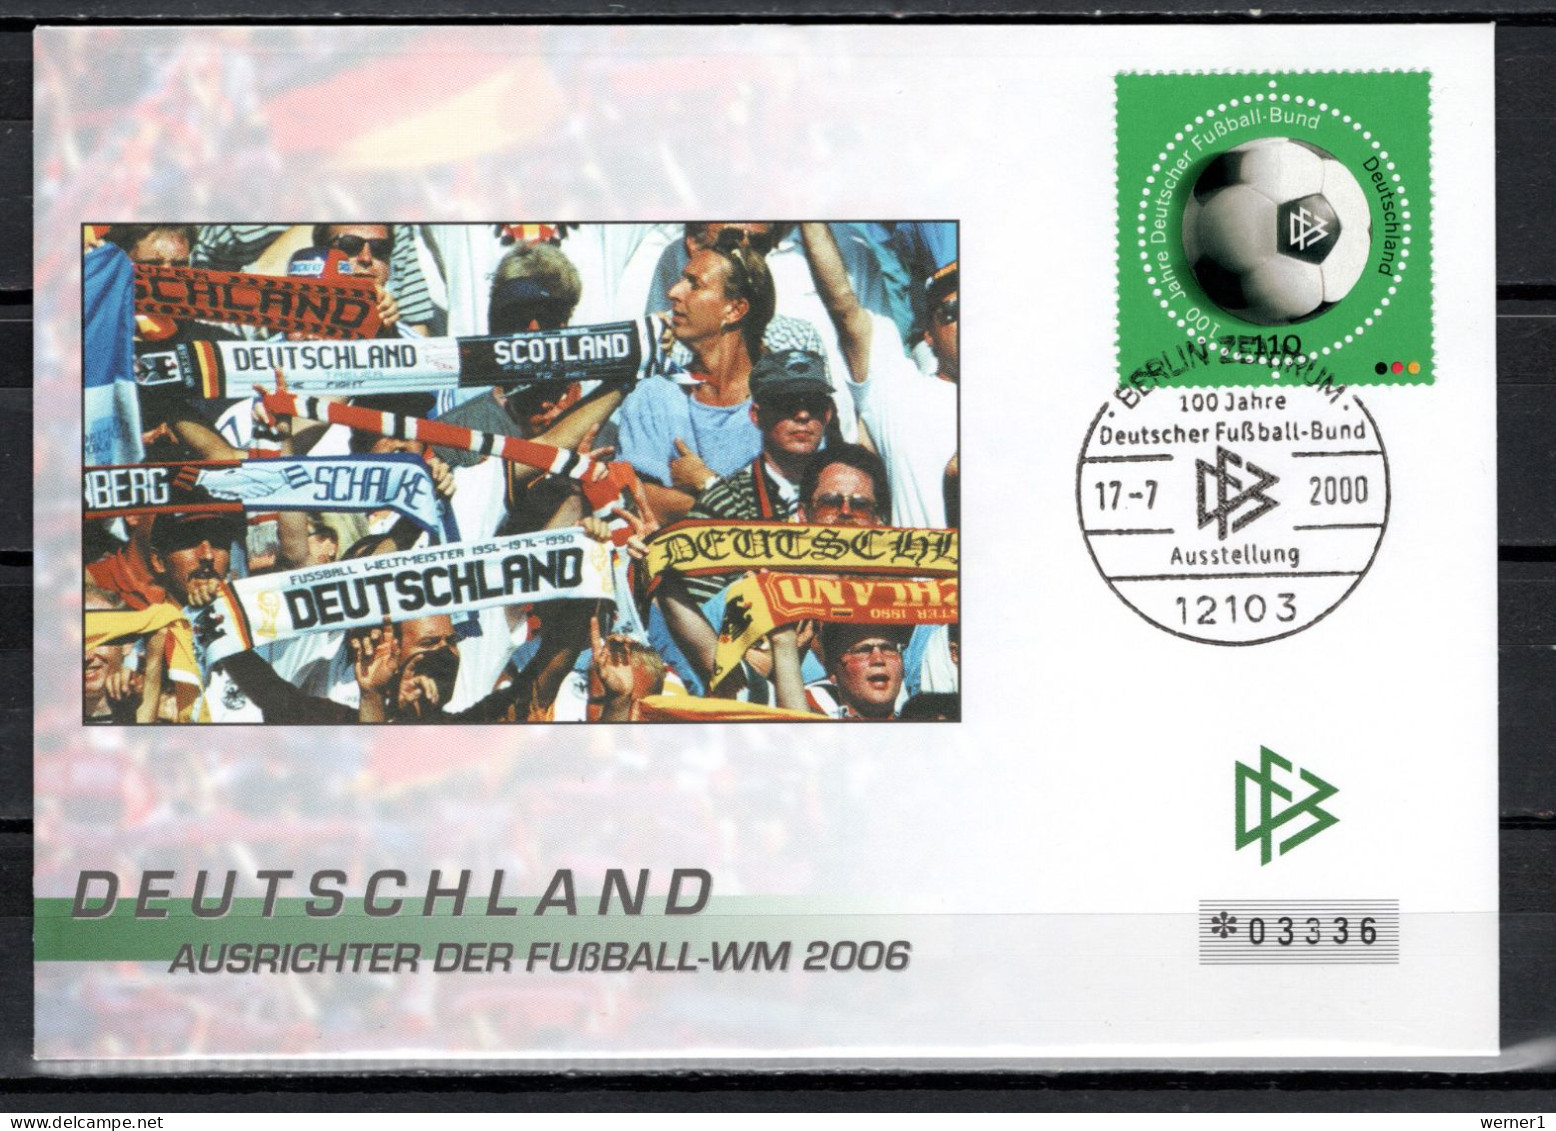 Germany 2000 Football Soccer World Cup Commemorative Cover - 2006 – Duitsland